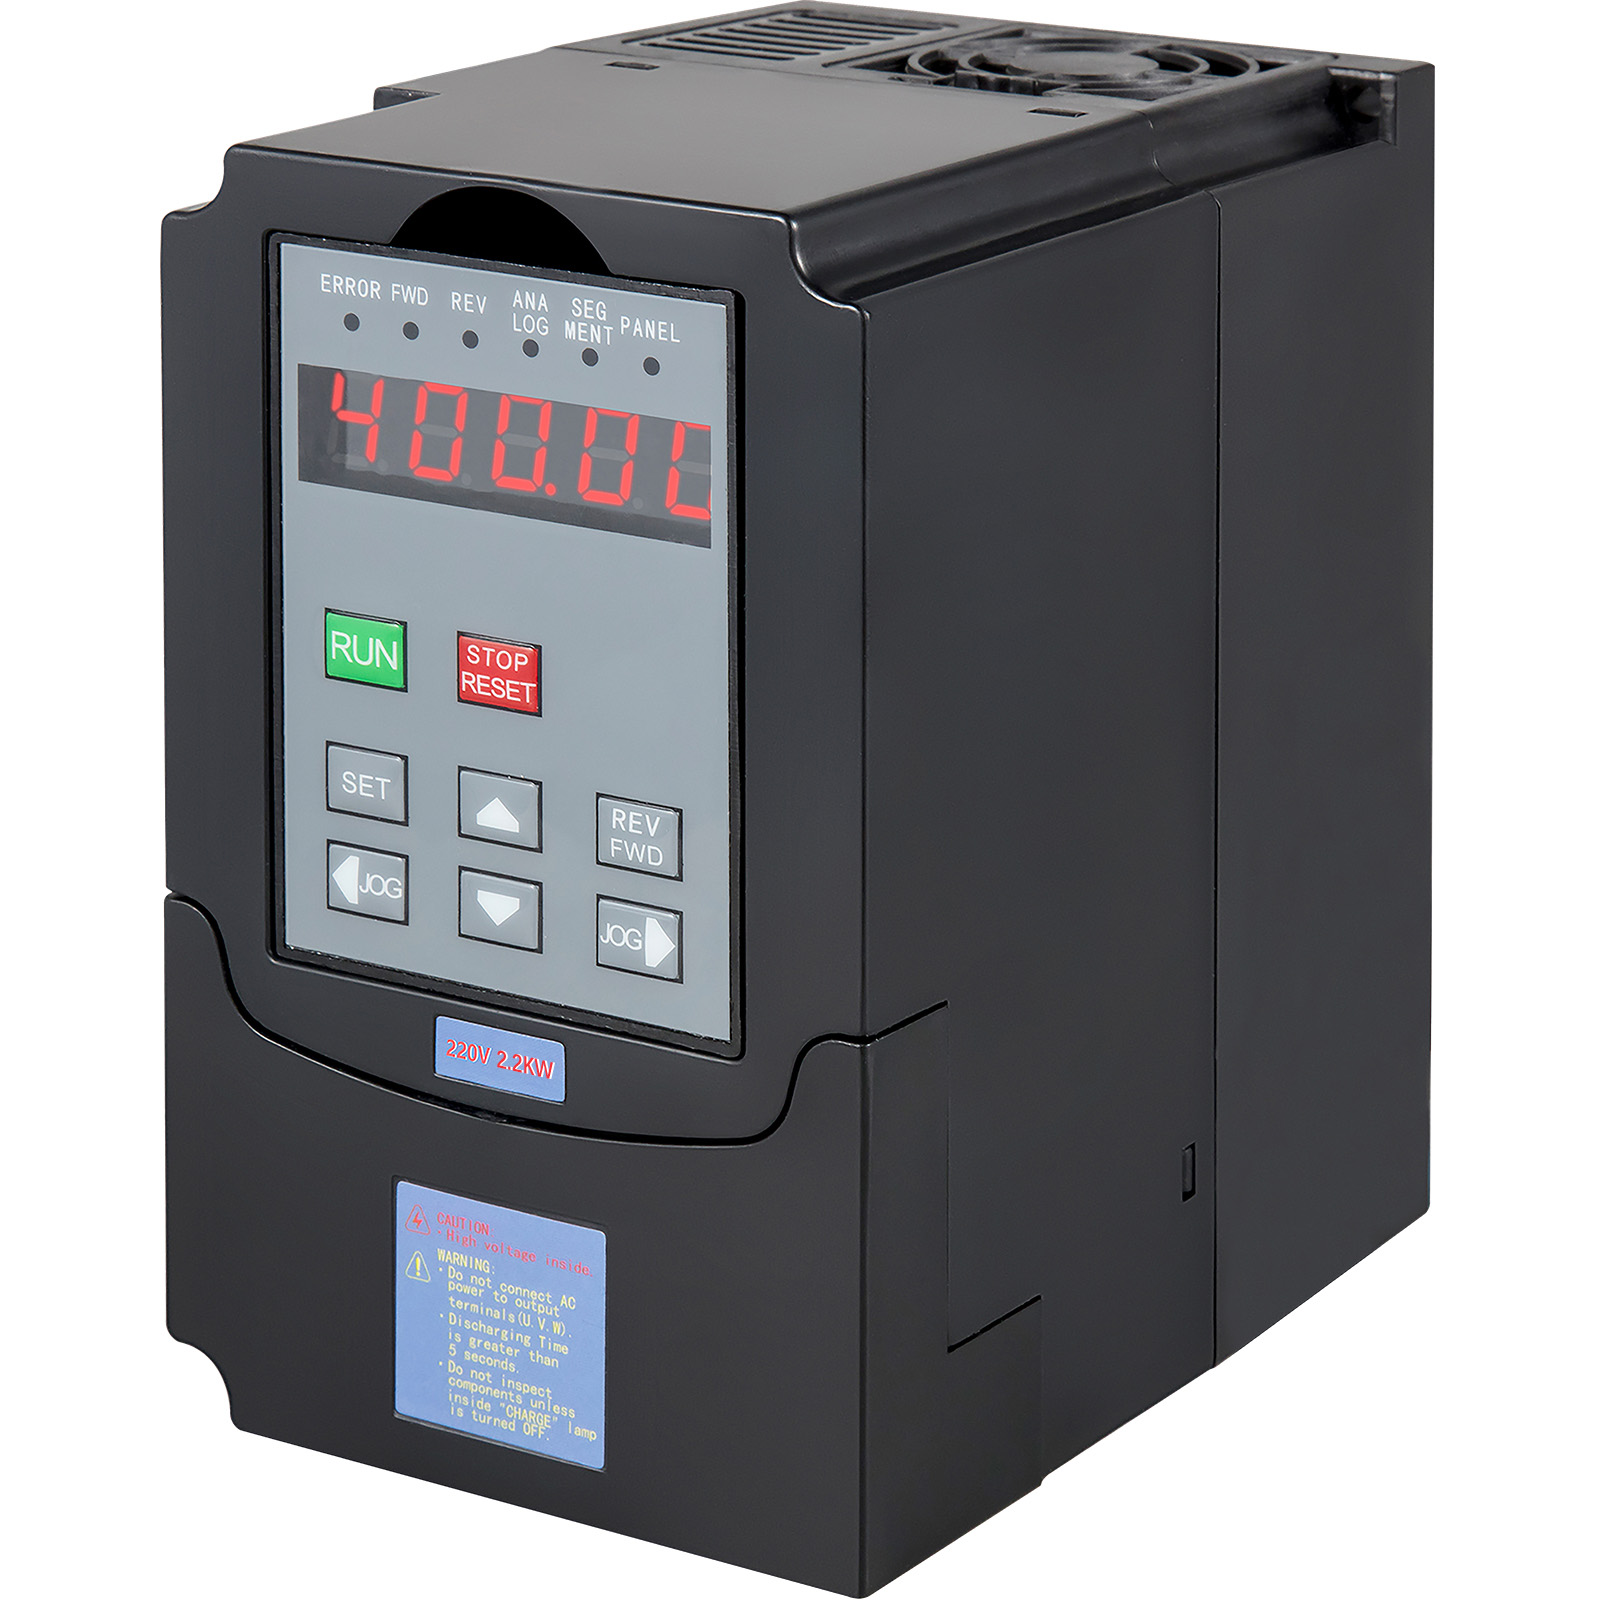 2.2KW 3HP VFD 10A 220V VARIABLE FREQUENCY DRIVE INVERTER VFD SPEED CONTROL VFD 